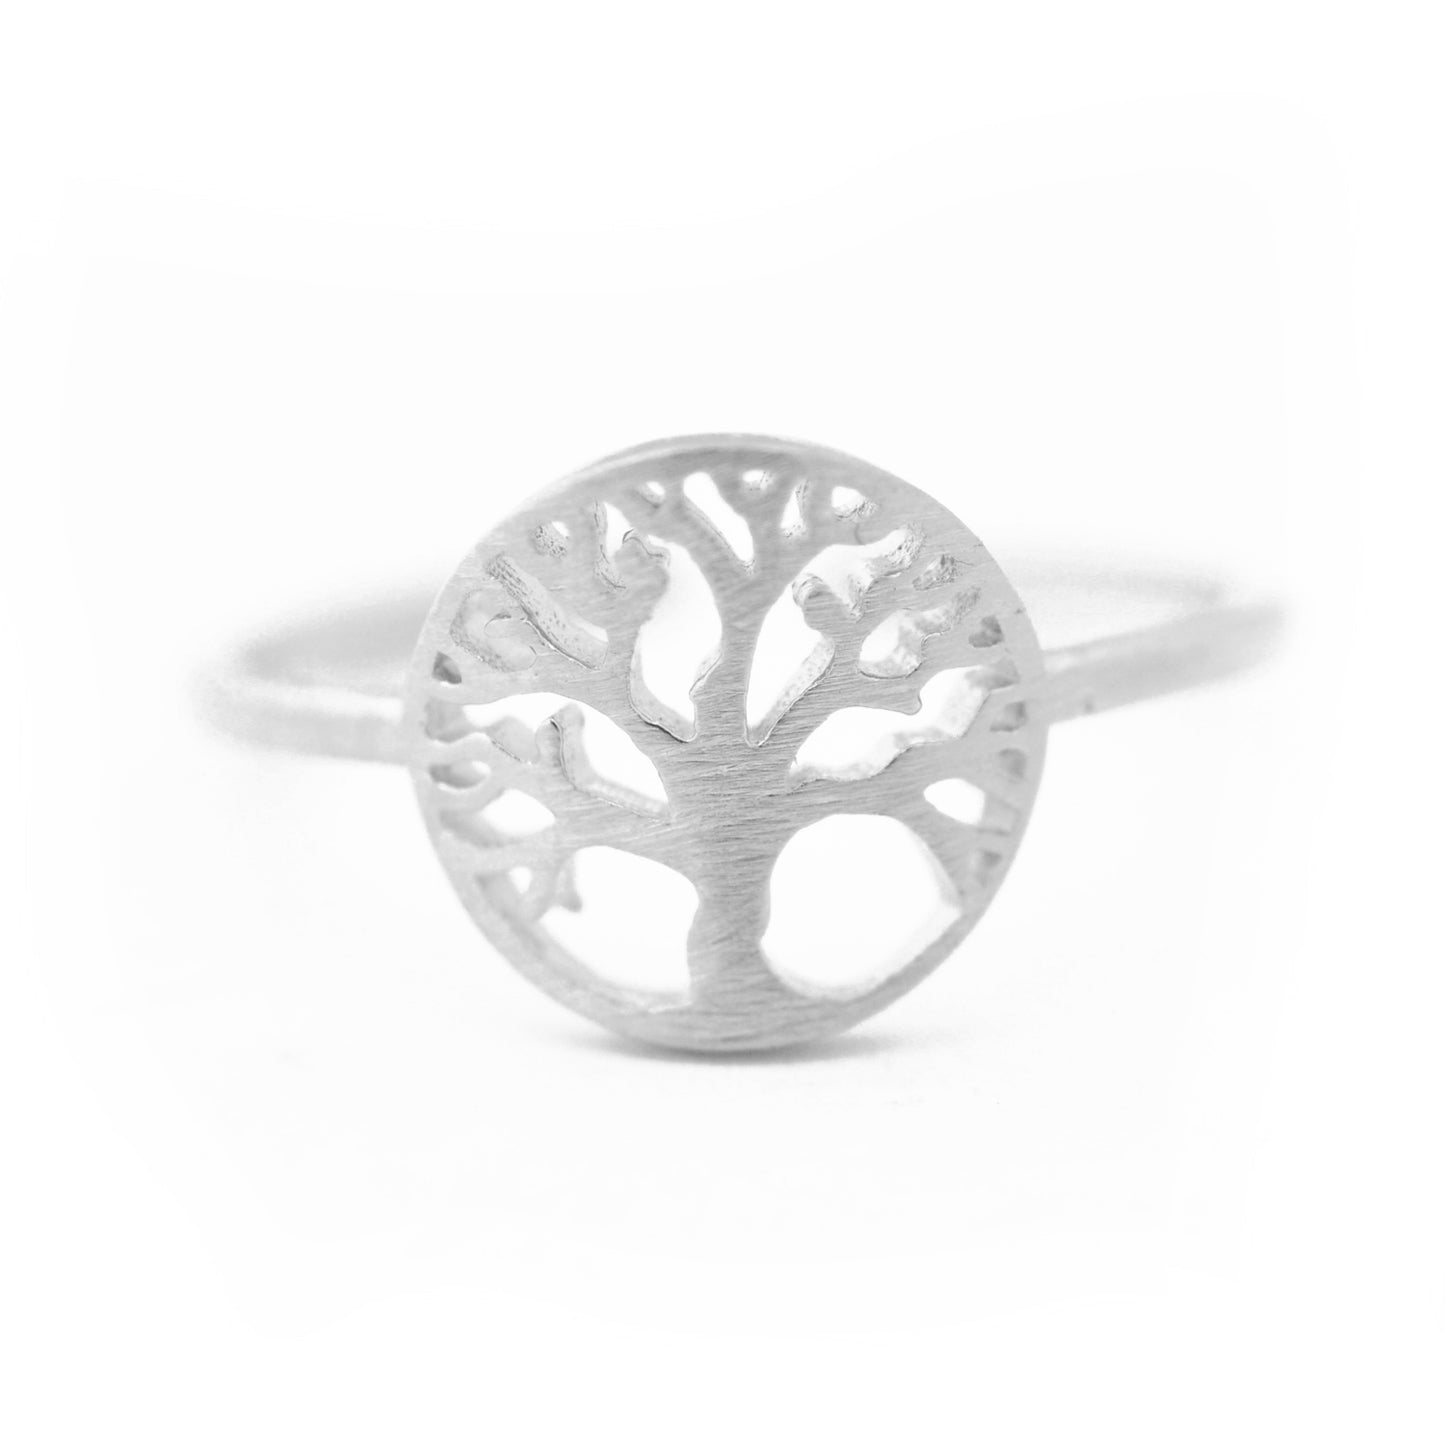 Ring of life tree / size adjustable